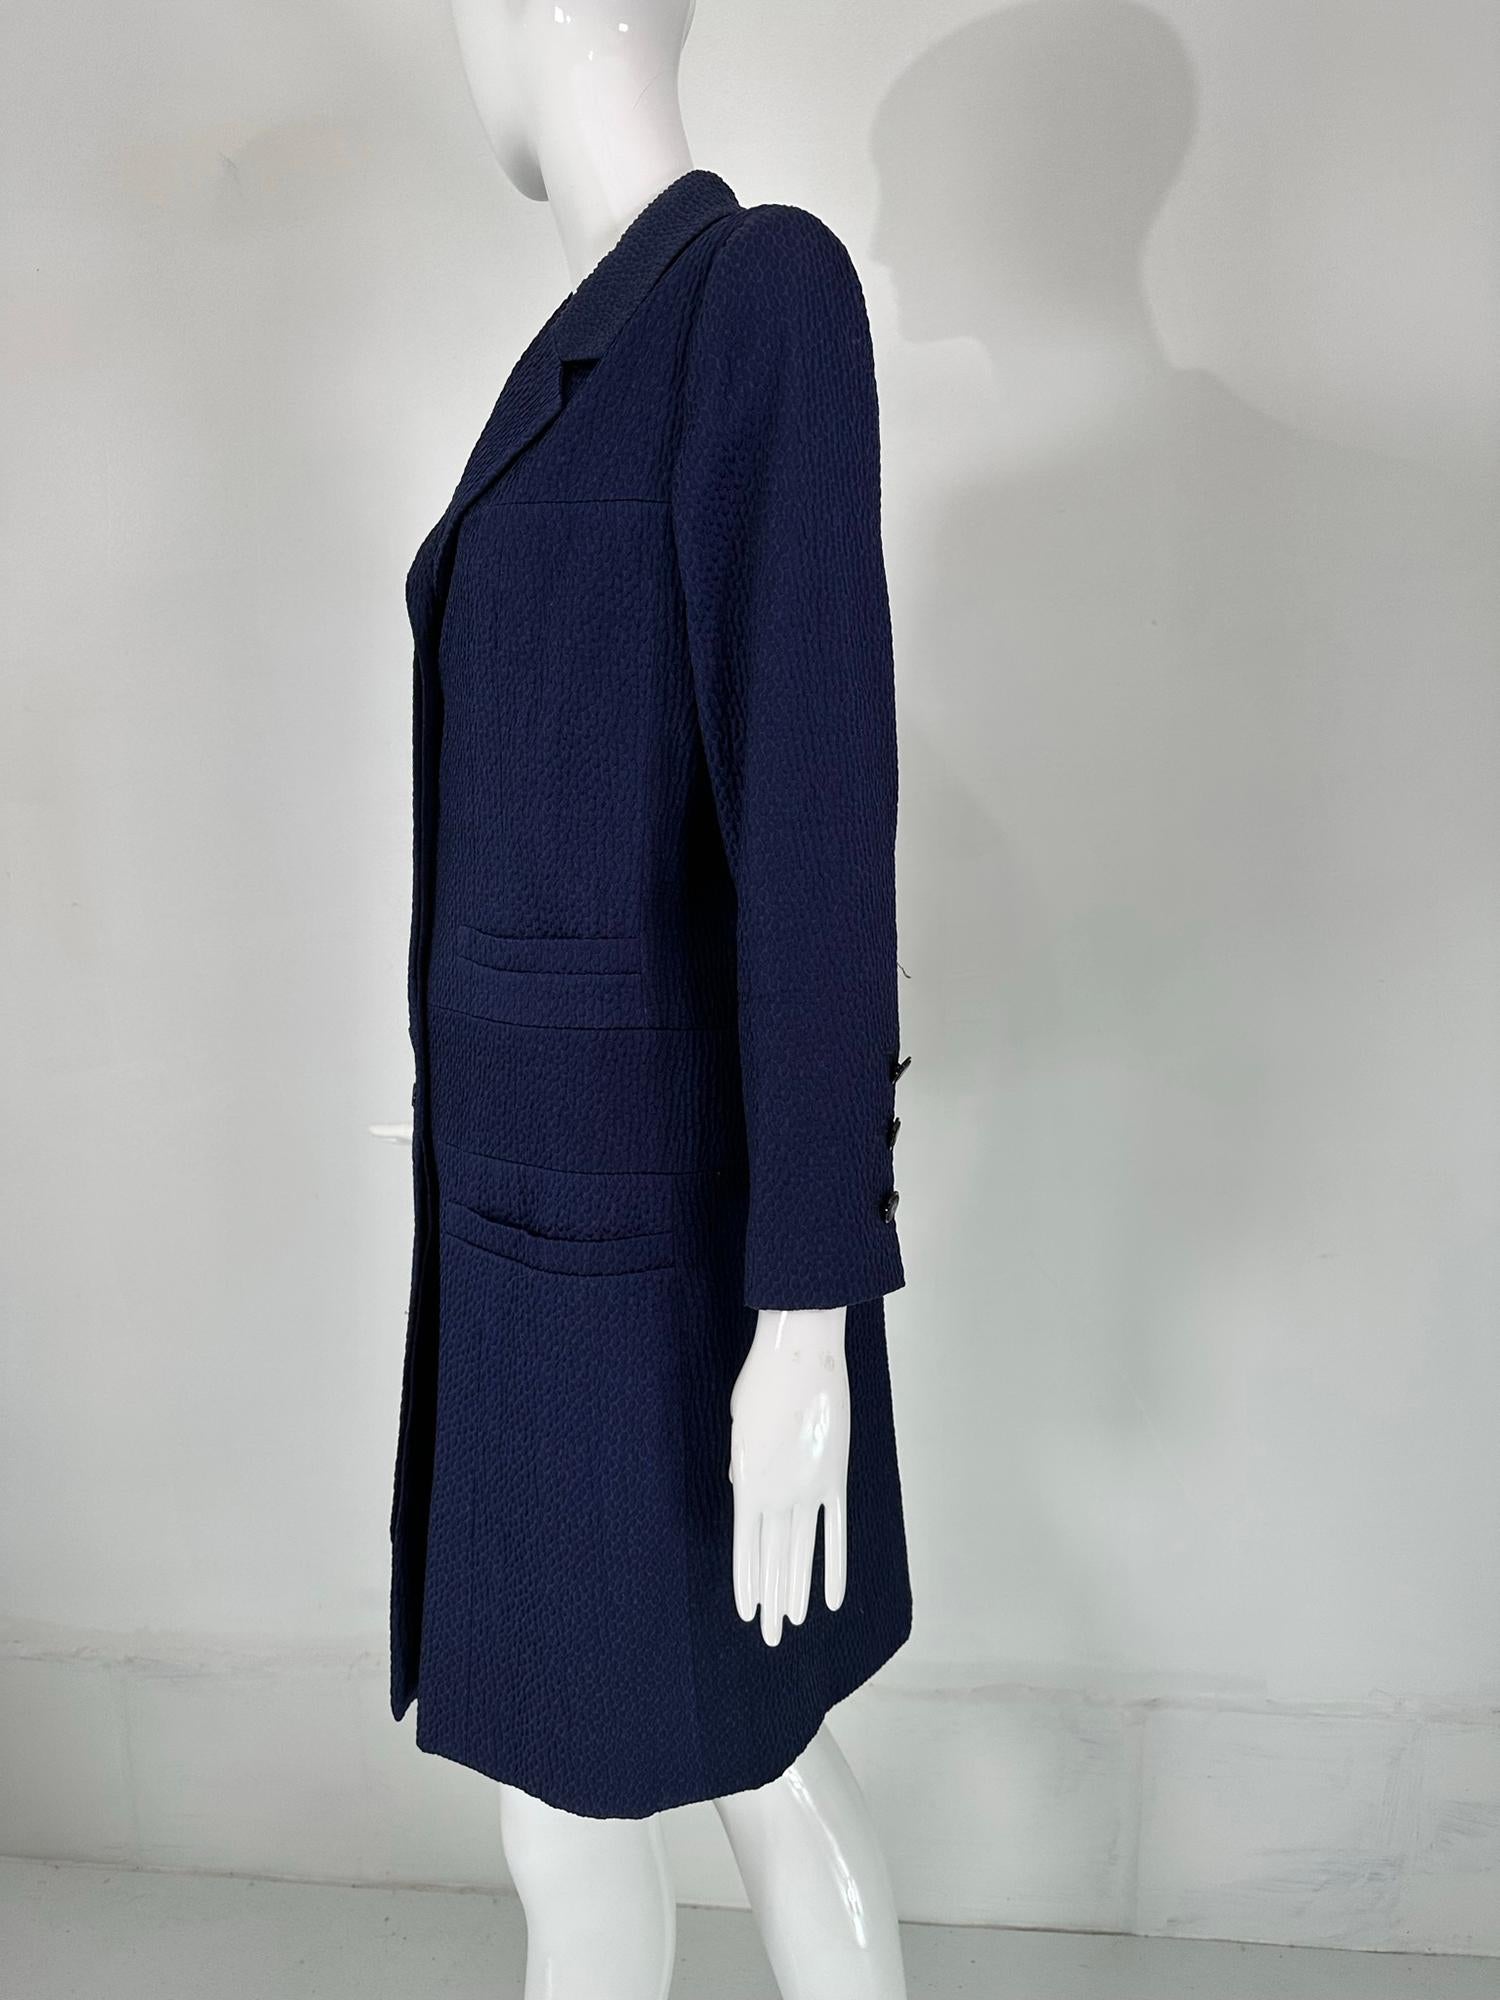 Chanel Navy Blue Single Breasted 4 Pocket Cloque Cotton Coat  In Good Condition For Sale In West Palm Beach, FL